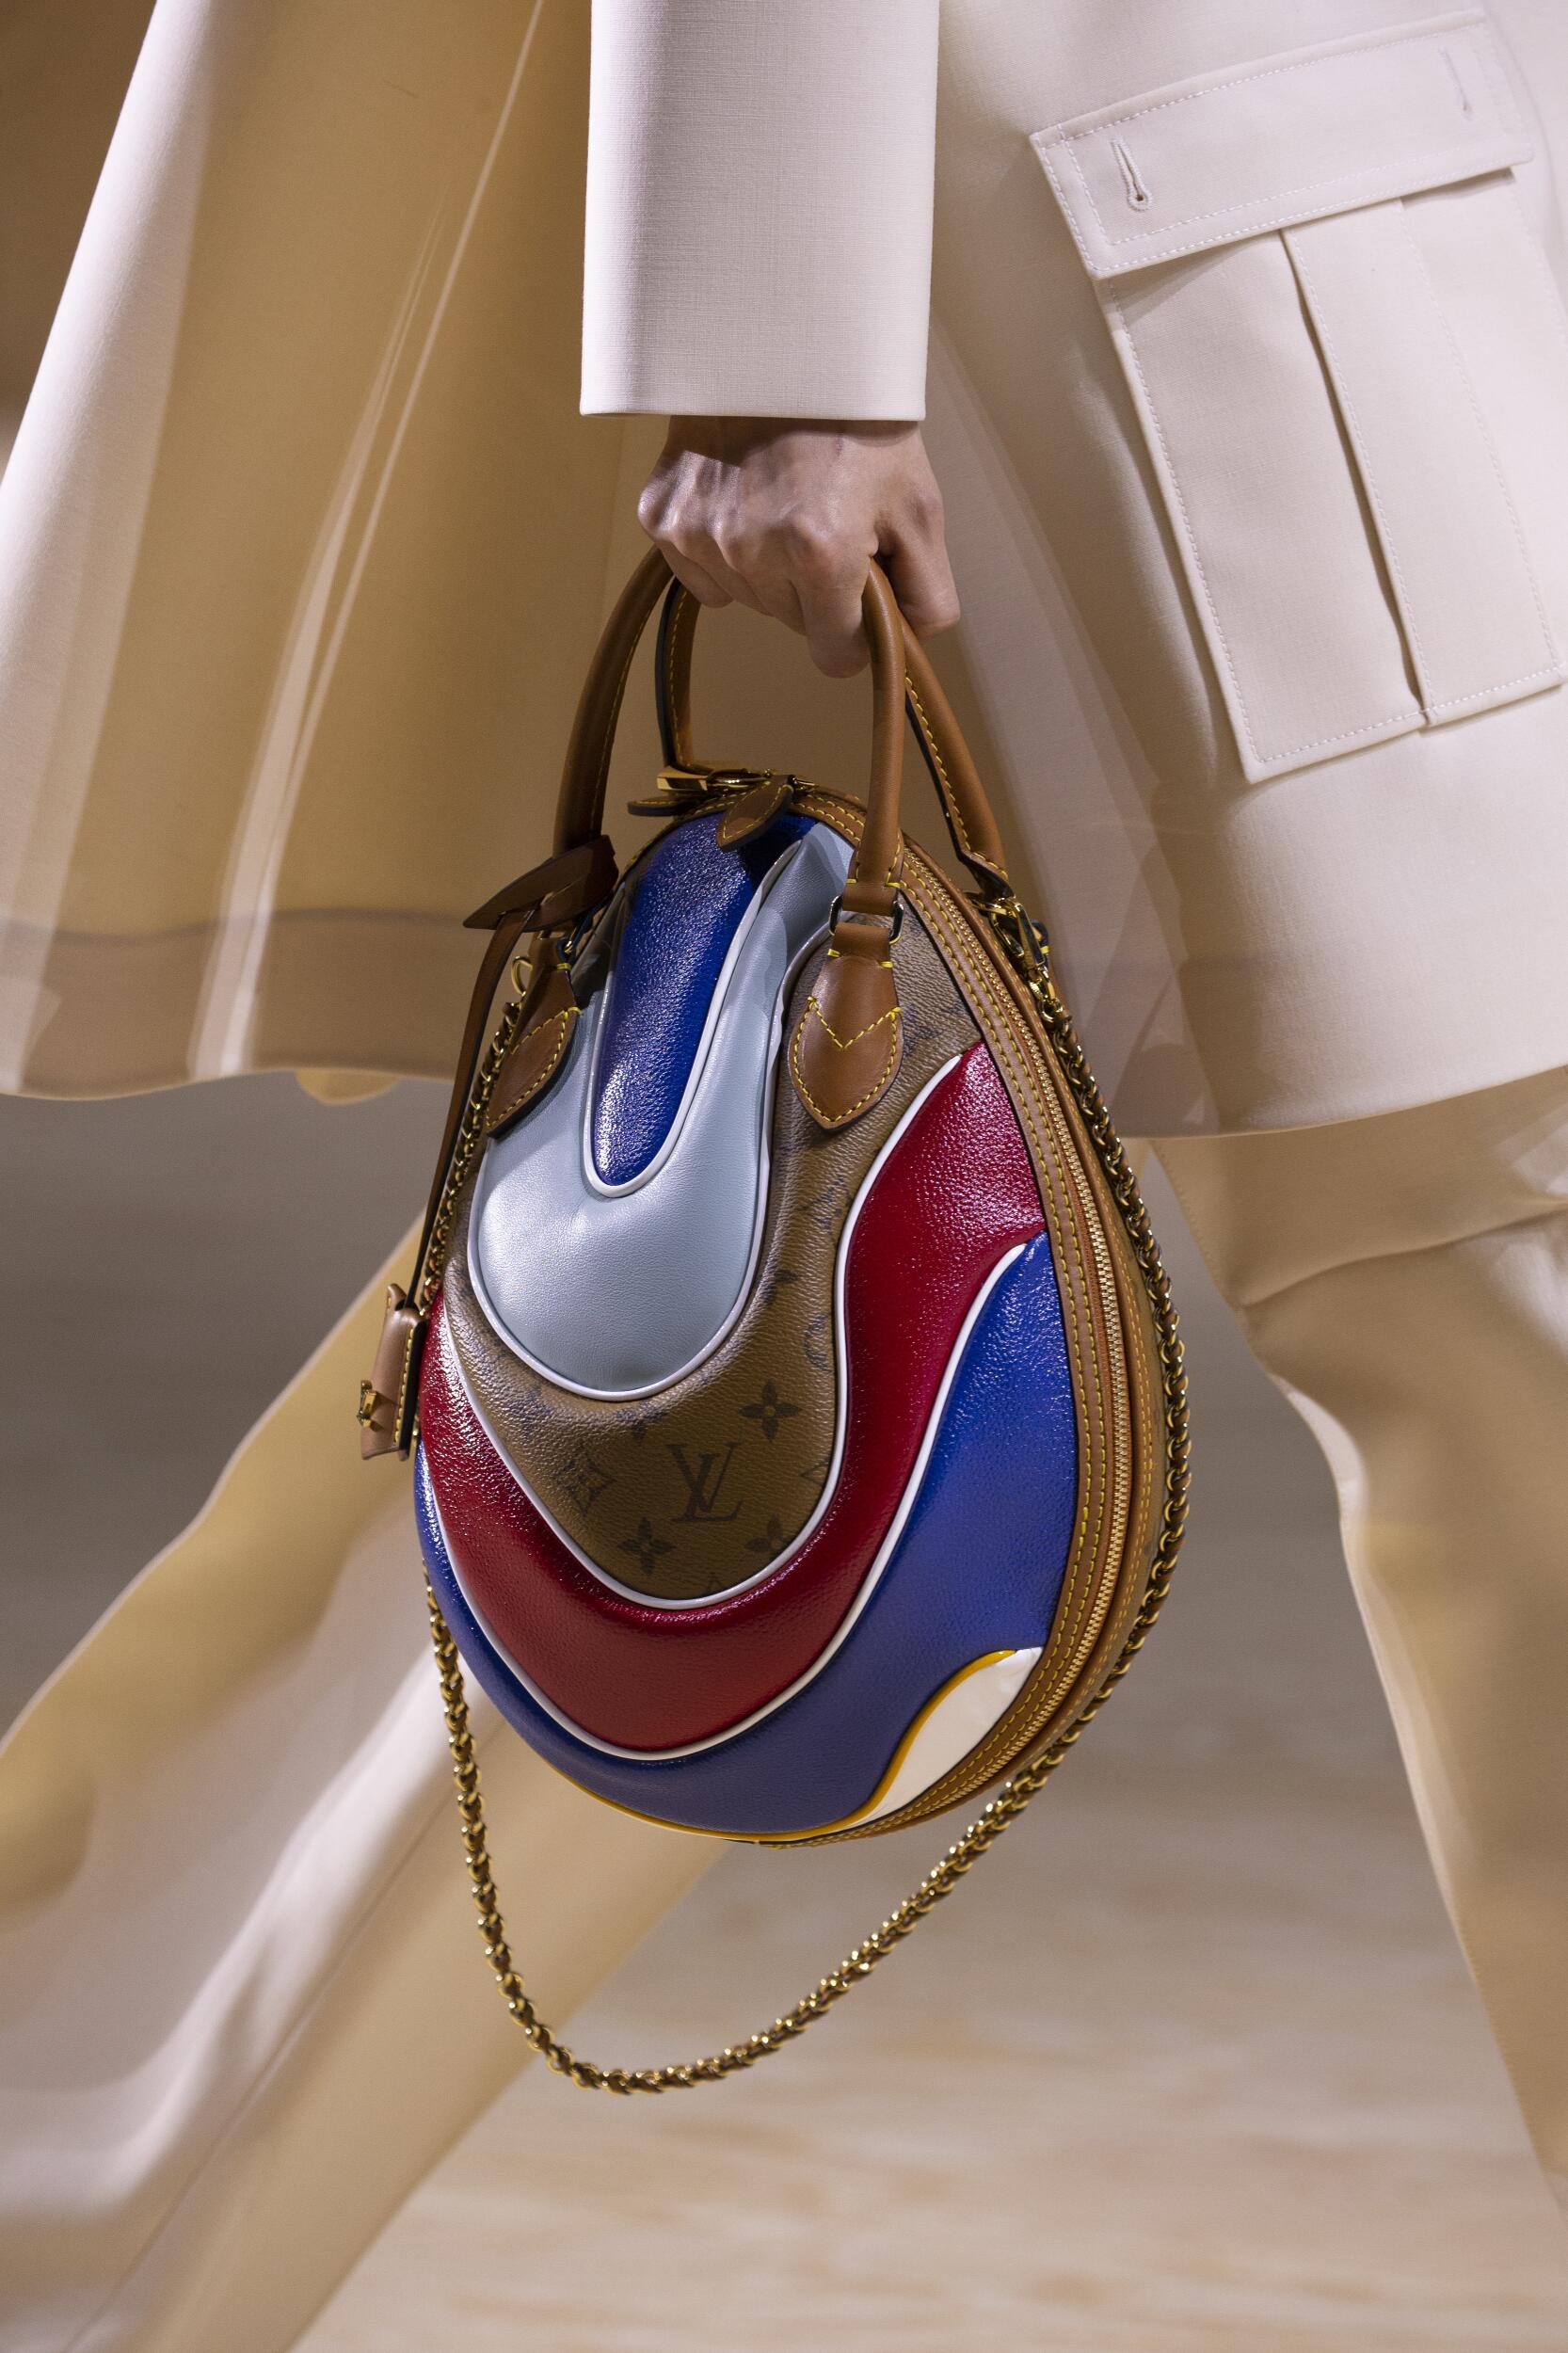 LOUIS VUITTON SPRING SUMMER 2020 WOMEN’S COLLECTION DETAILS | The Skinny Beep